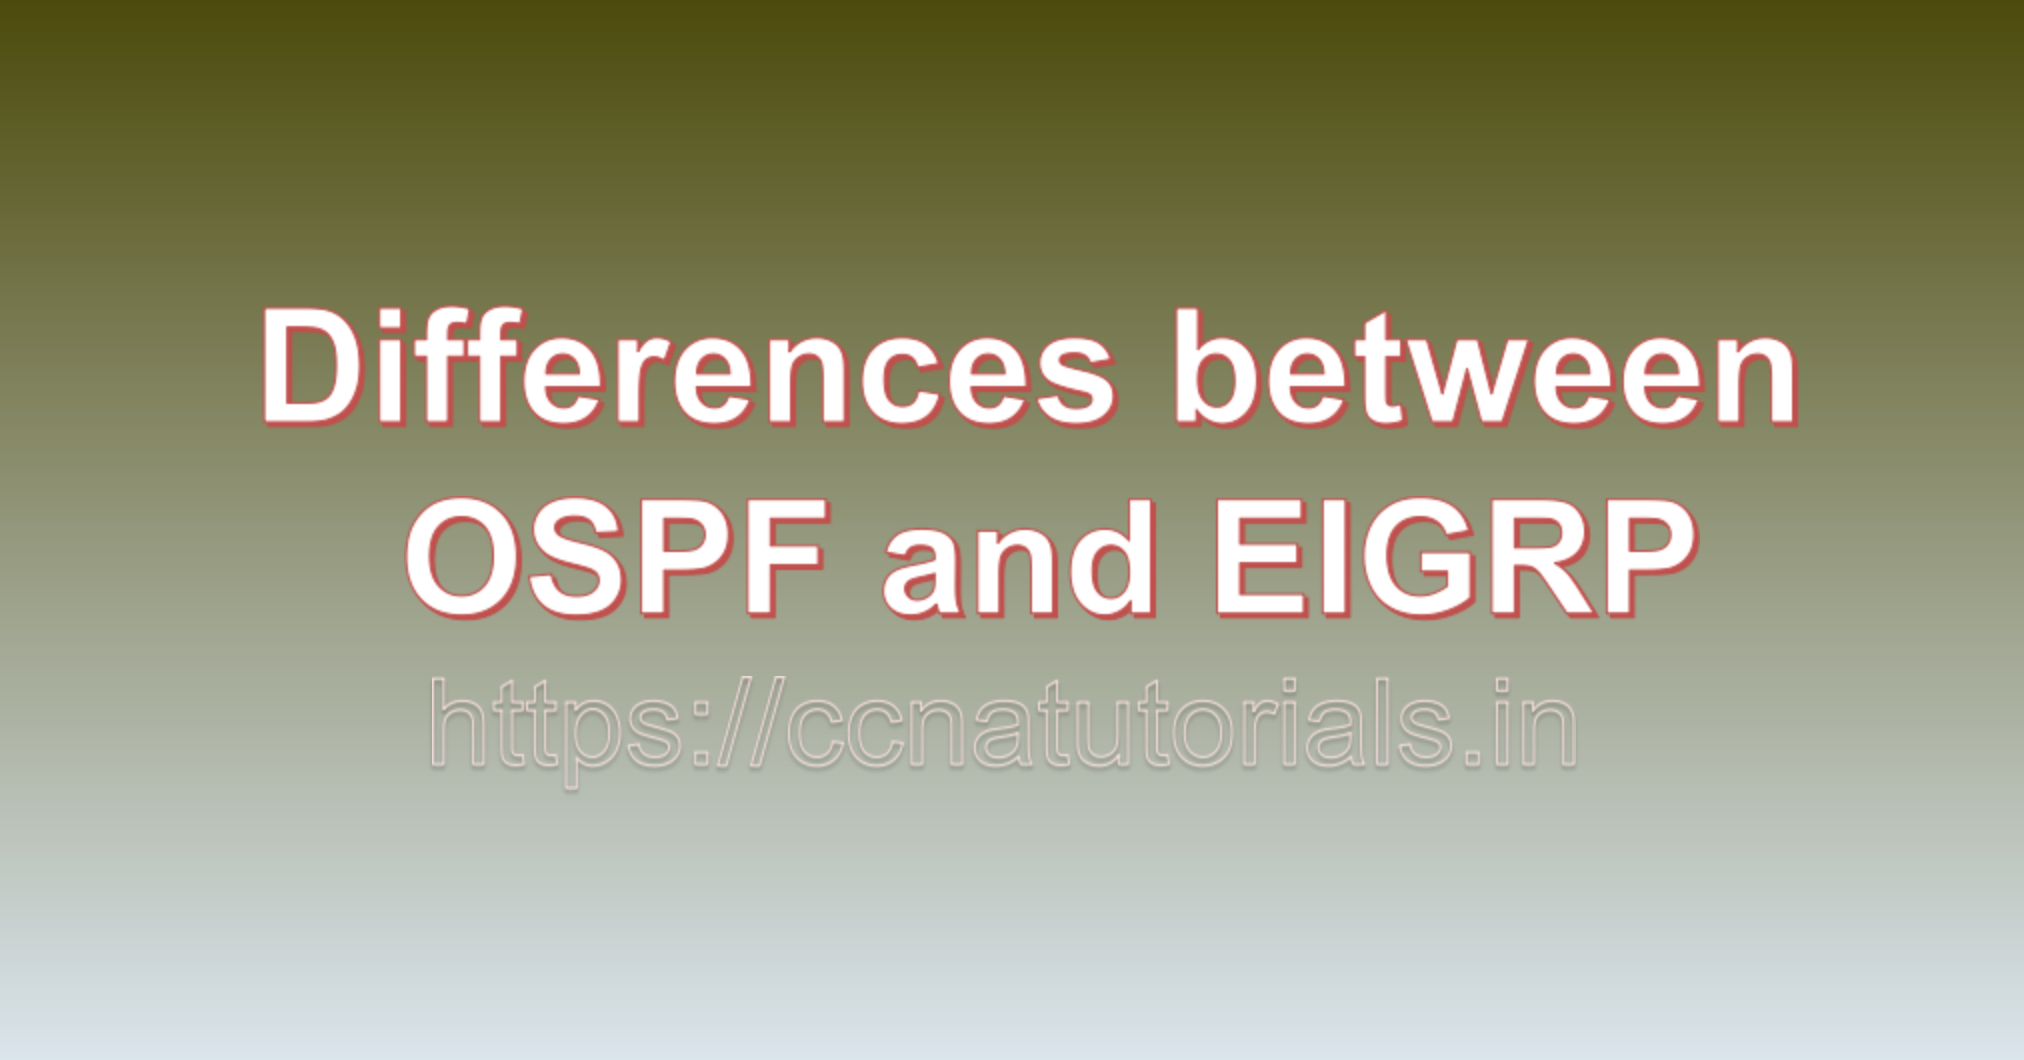 Differences between OSPF and EIGRP, ccna, ccna tutorials